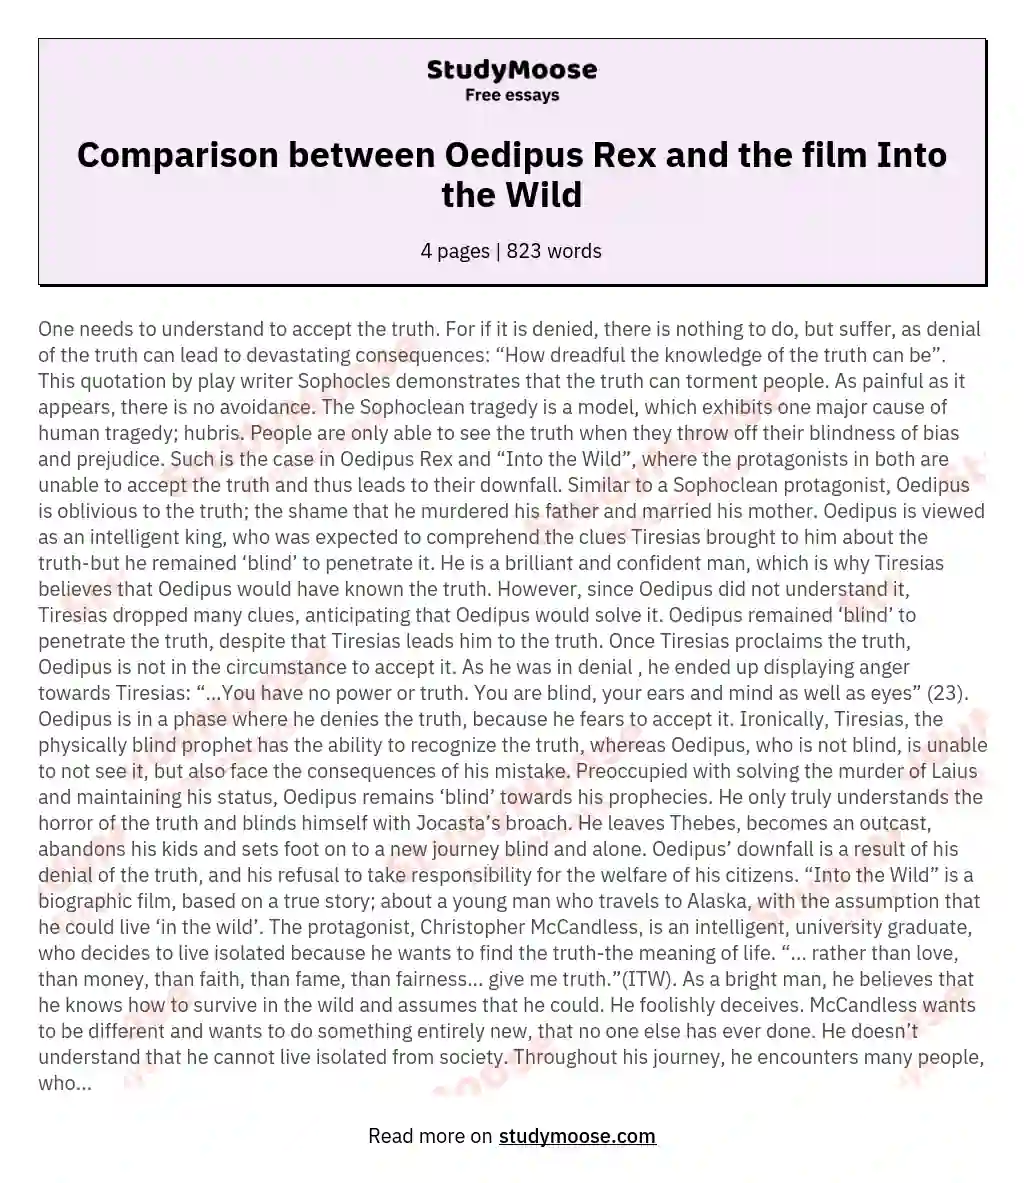 Comparison between Oedipus Rex and the film Into the Wild